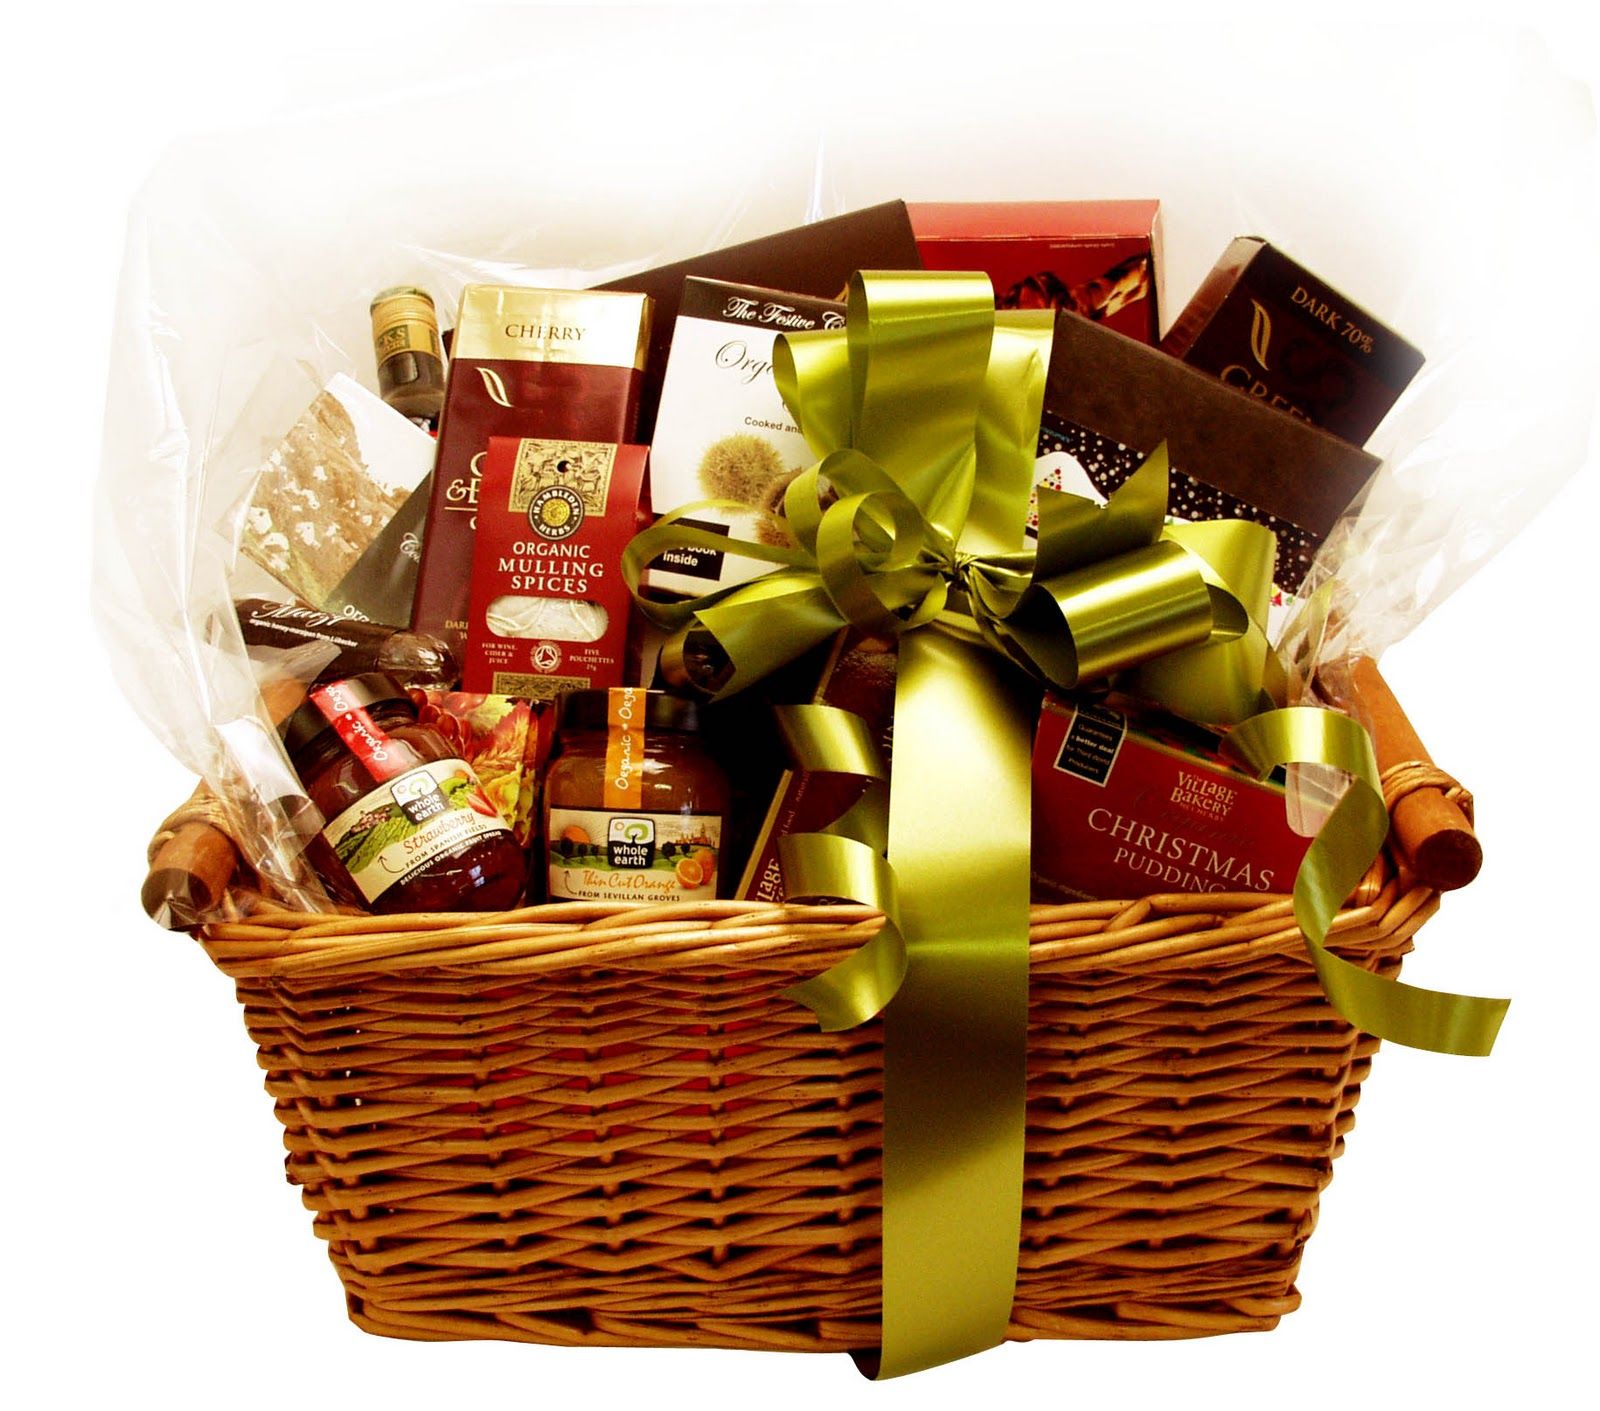 Fruit Baskets – The Best and Healthiest Gift Option